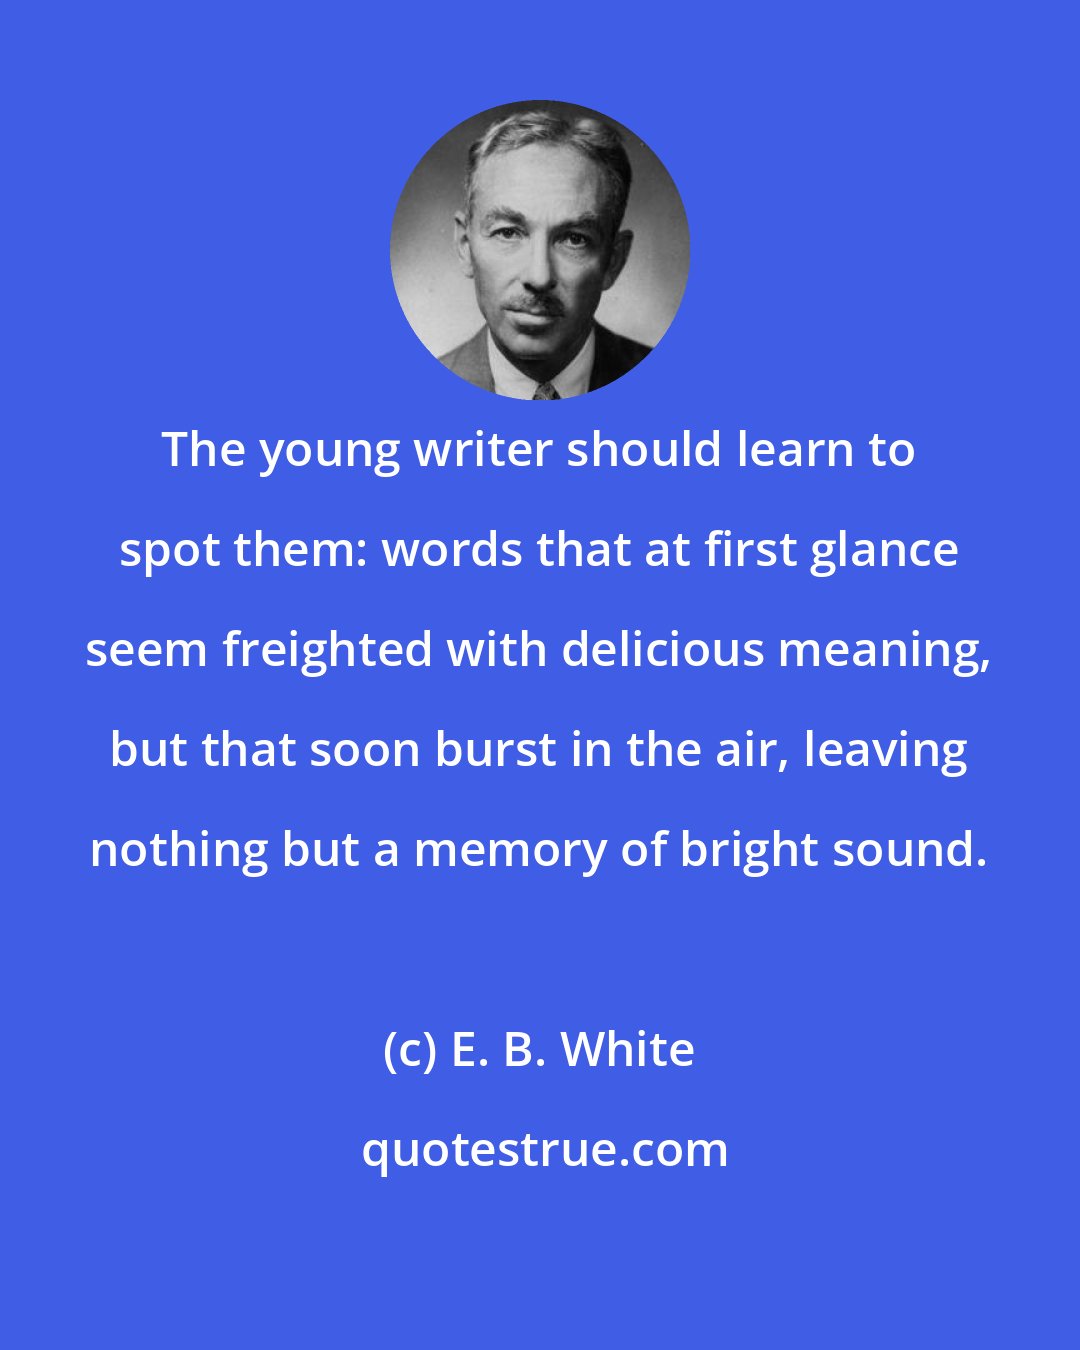 E. B. White: The young writer should learn to spot them: words that at first glance seem freighted with delicious meaning, but that soon burst in the air, leaving nothing but a memory of bright sound.